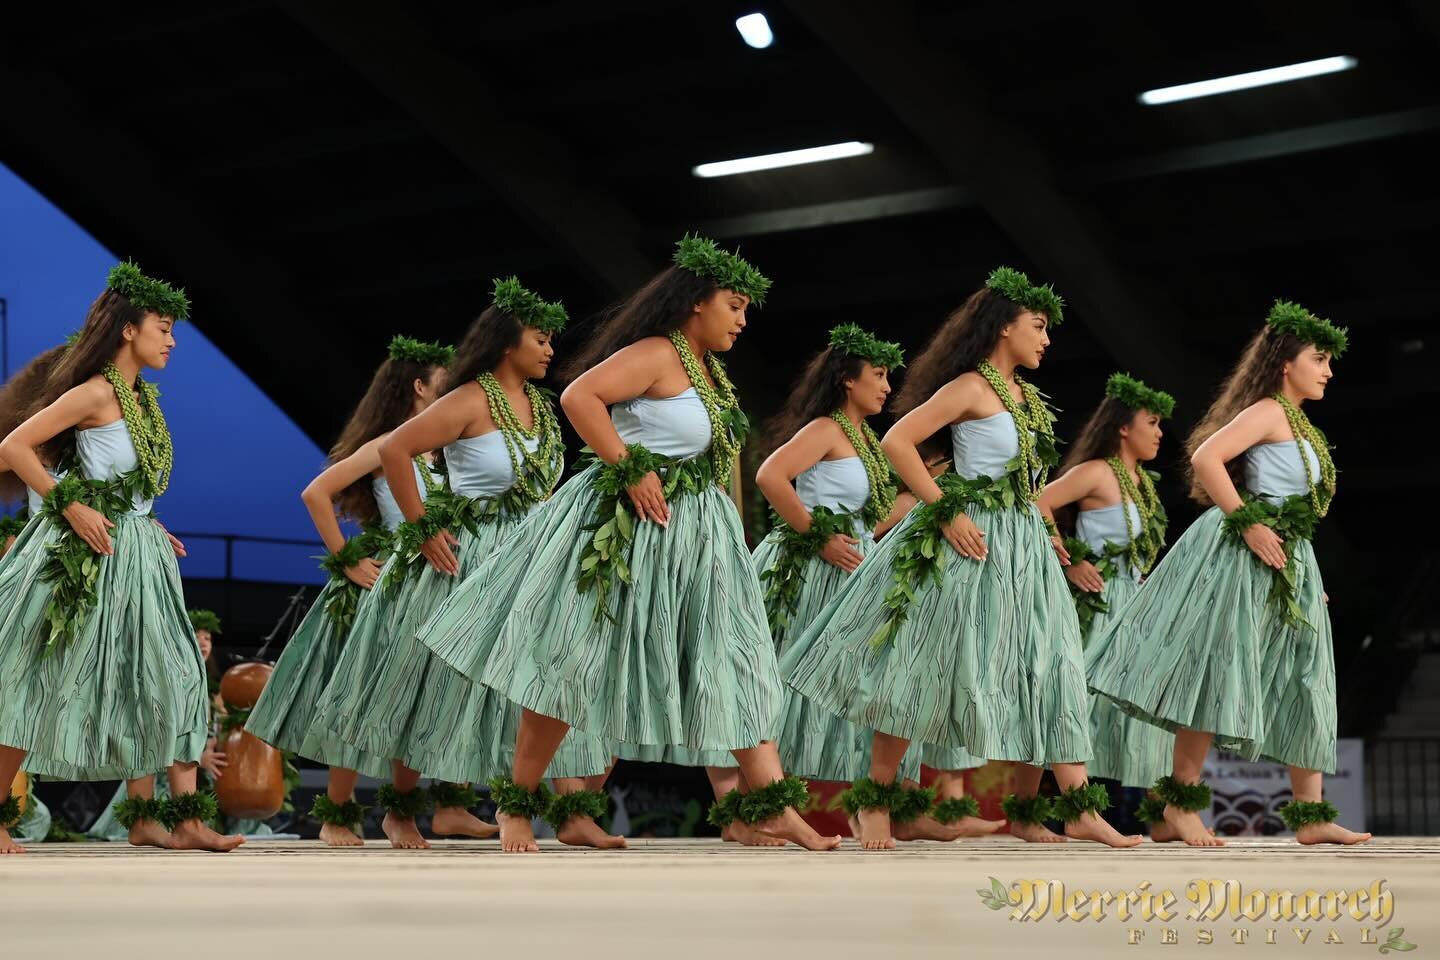 It&rsquo;s Merrie Monarch Week and congratulations to Merrie Monarch on winning No. 1 on Best Cultural Festival in the US!

Who else is excited for this year&rsquo;s performances?!?💌

#merriemonarch #missalohahula